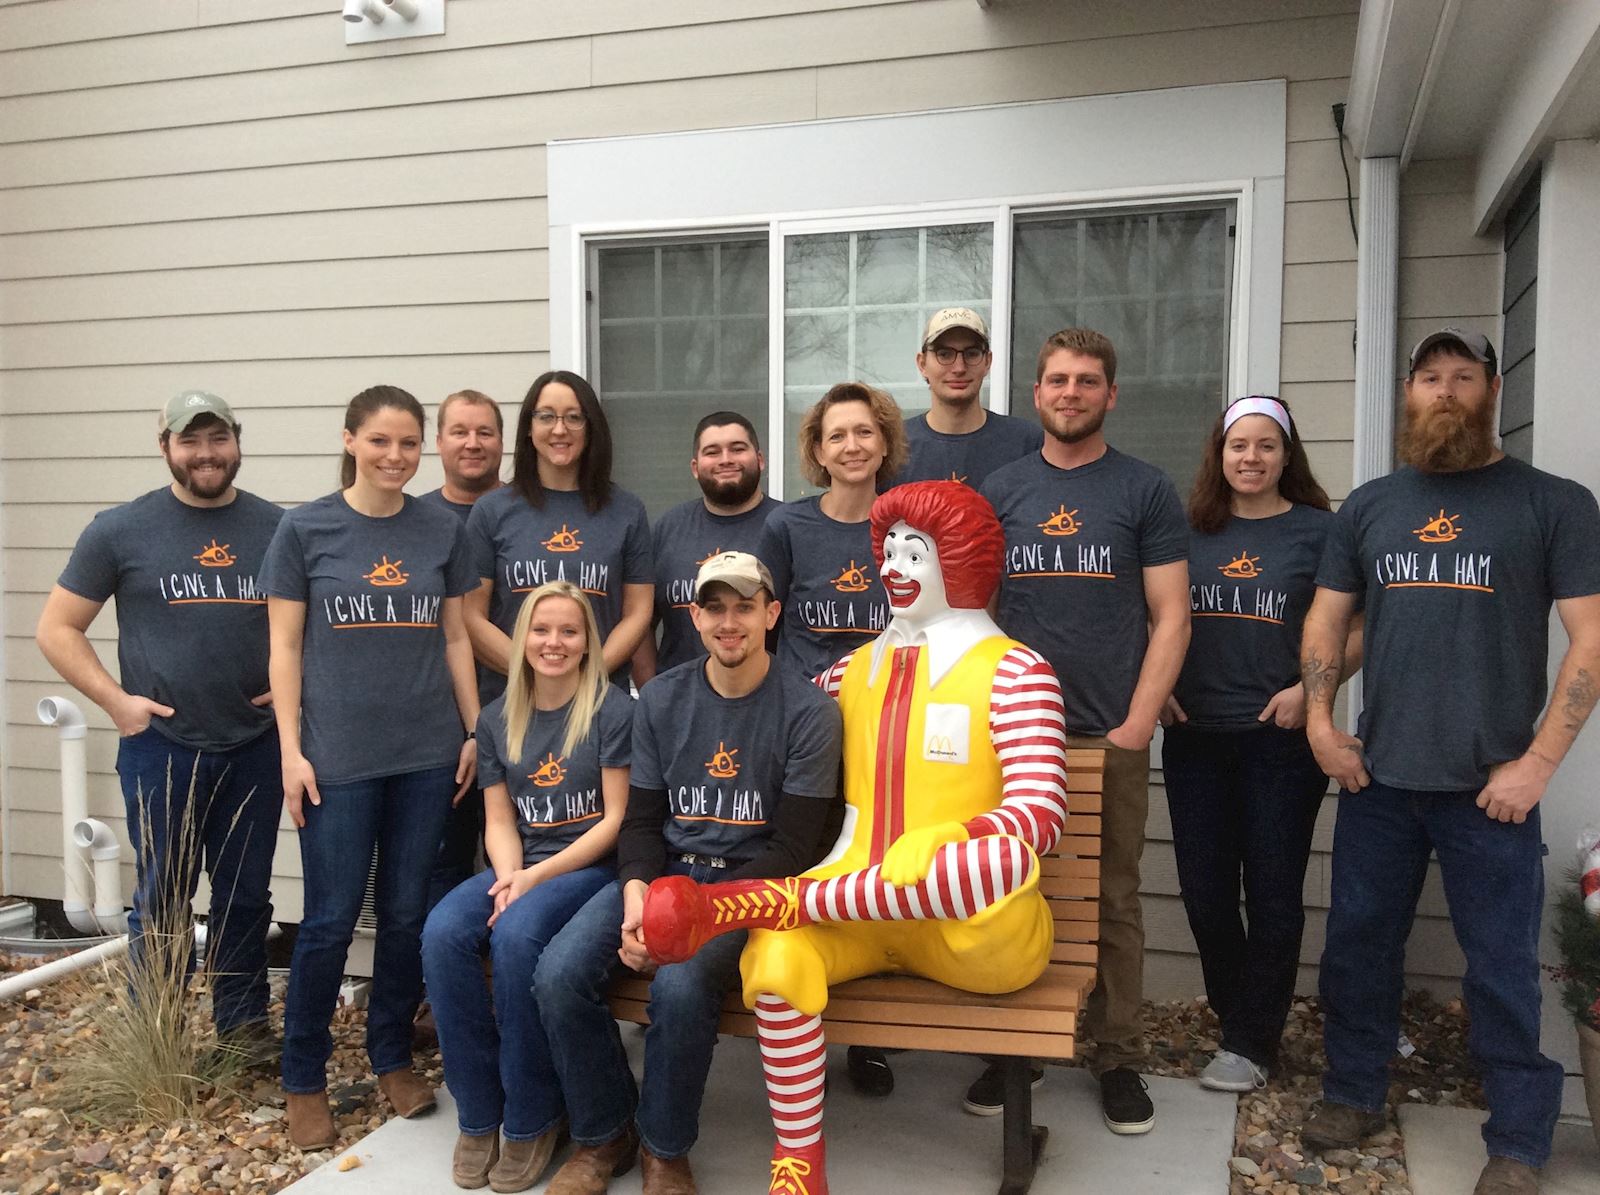 Pork meal brings smiles to Ronald McDonald House